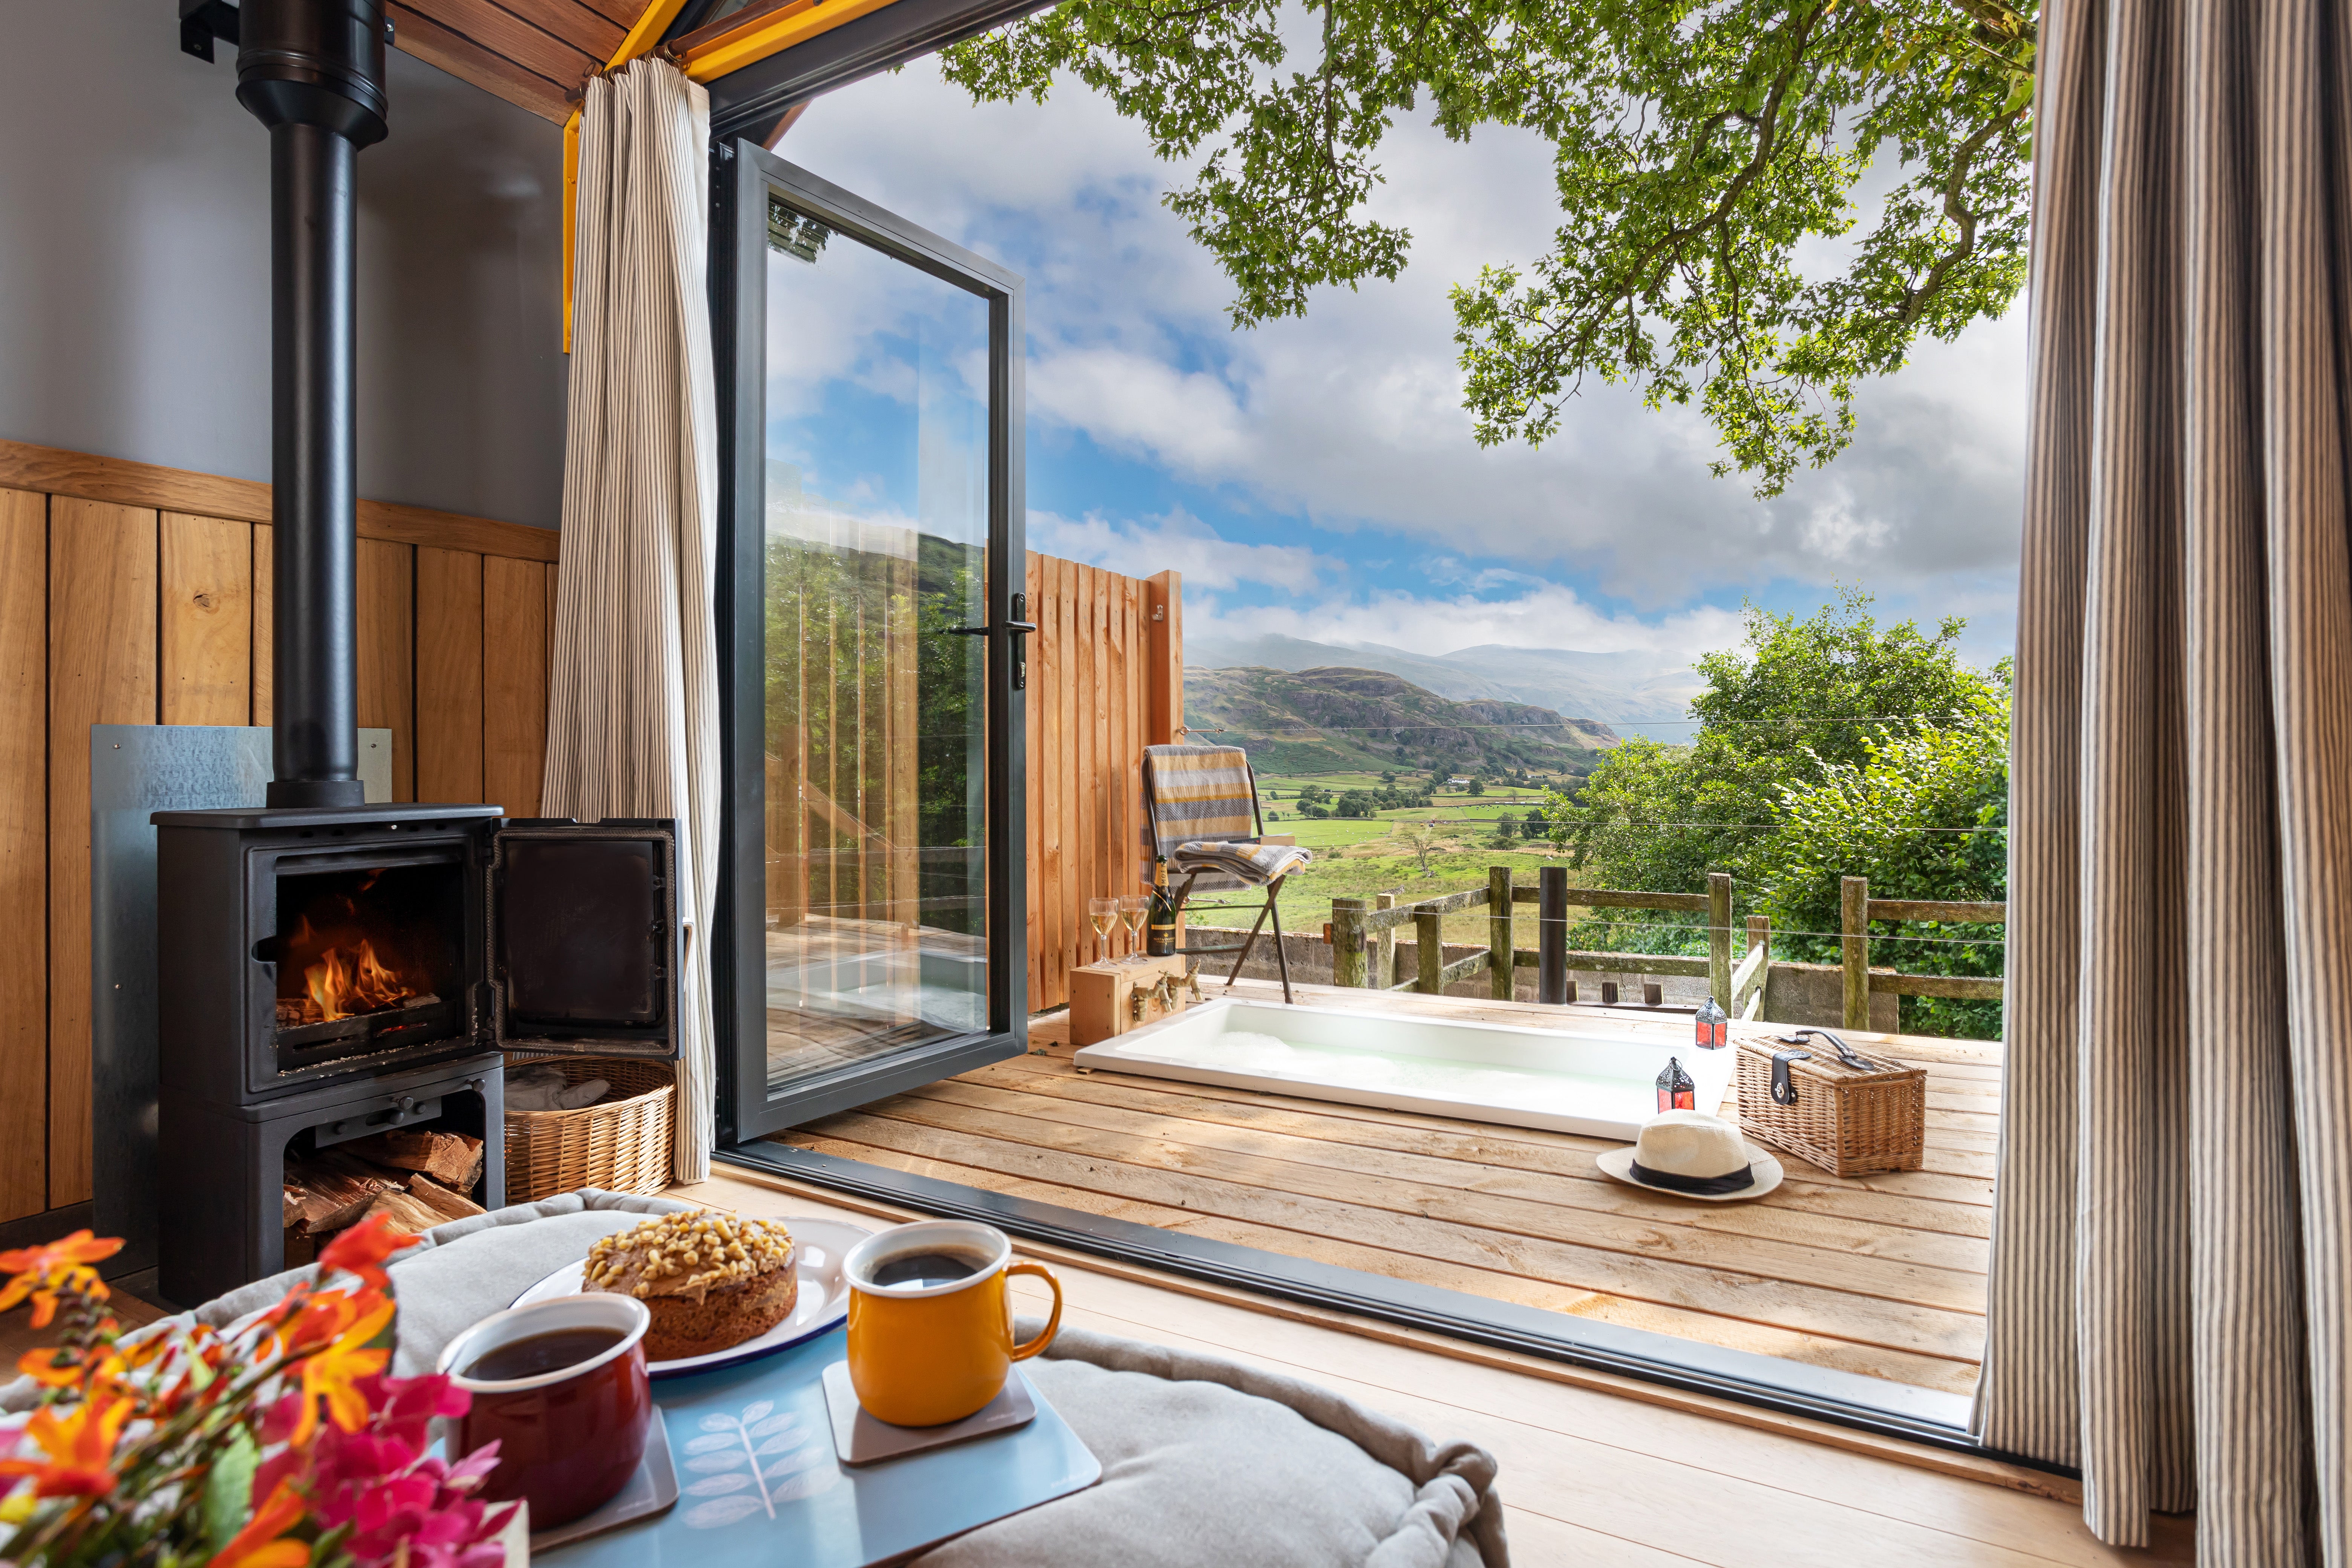 Low Nest Farms offer several forms of accommodation in the Lake District, but the Helvellyn Hut steals the show